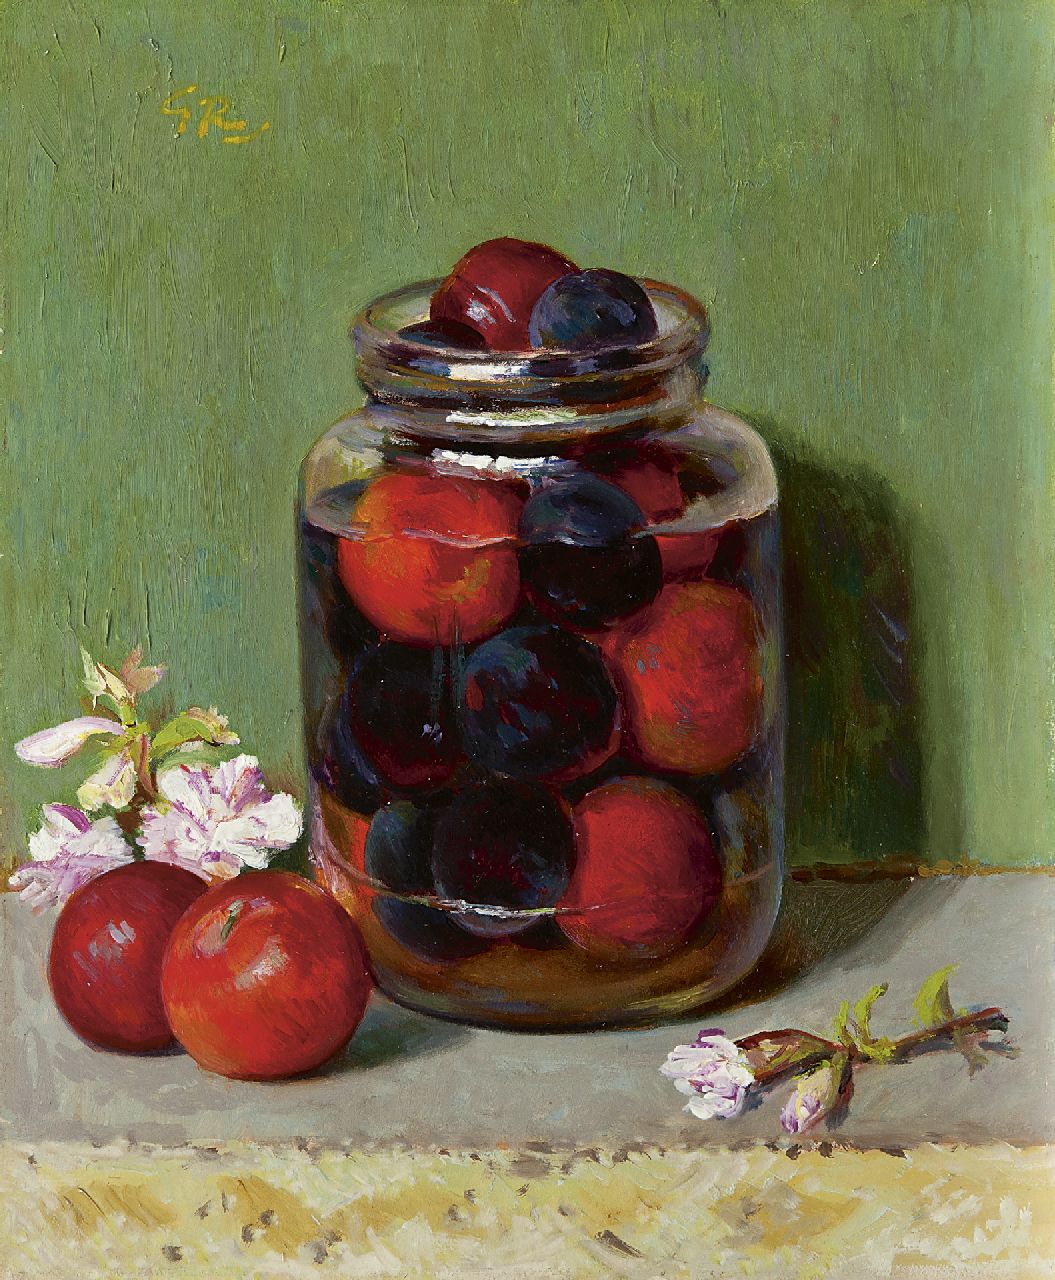 Röling G.V.A.  | Gerard Victor Alphons 'Gé' Röling, Plums in a pot, Öl auf Holzfaser 30,1 x 25,0 cm, signed u.l. with initials and in full on the reverse